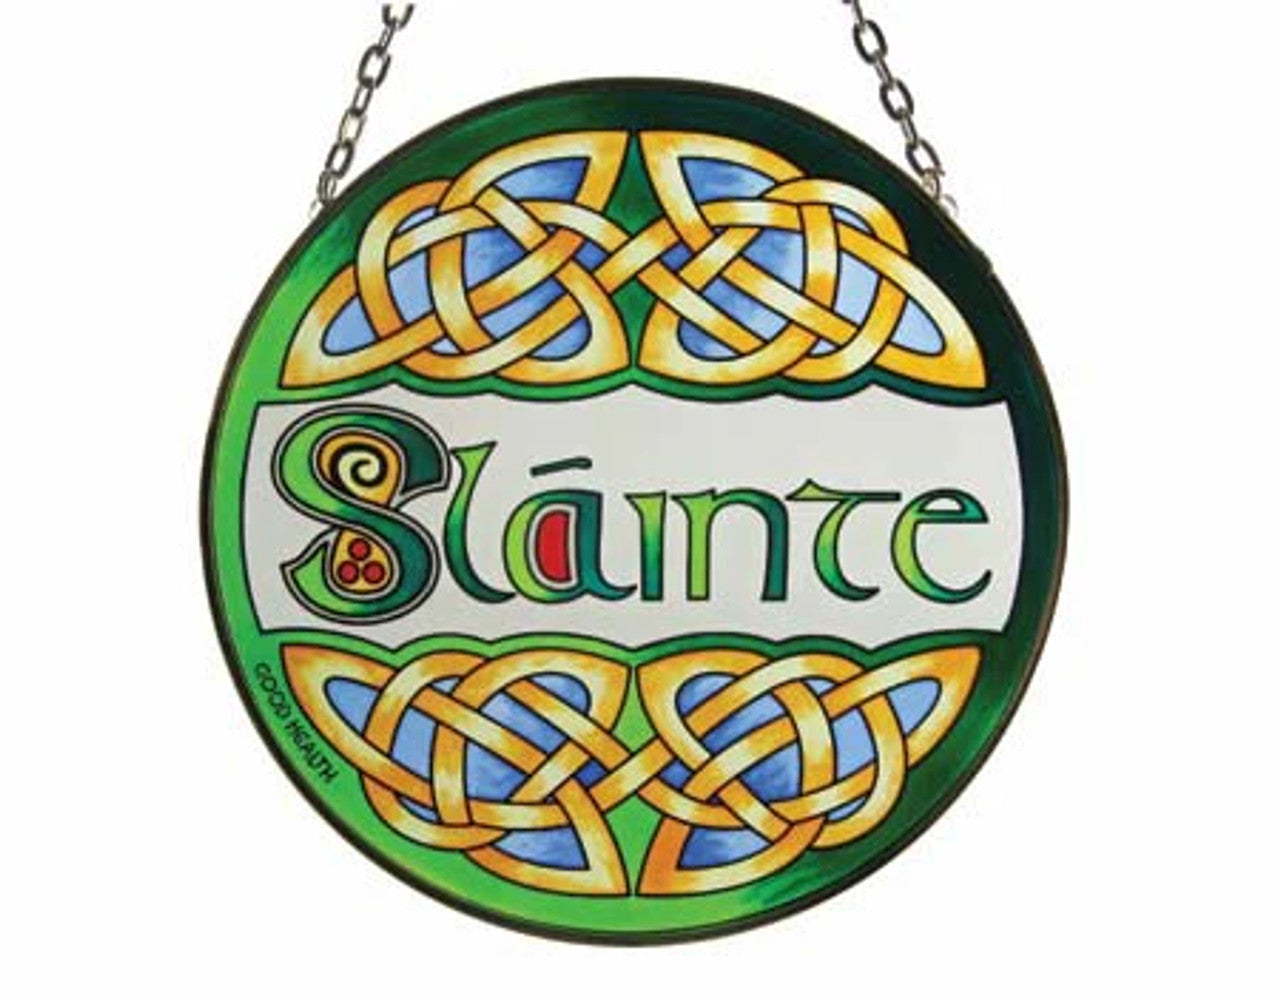 Round Slainte Stained Glass Panel